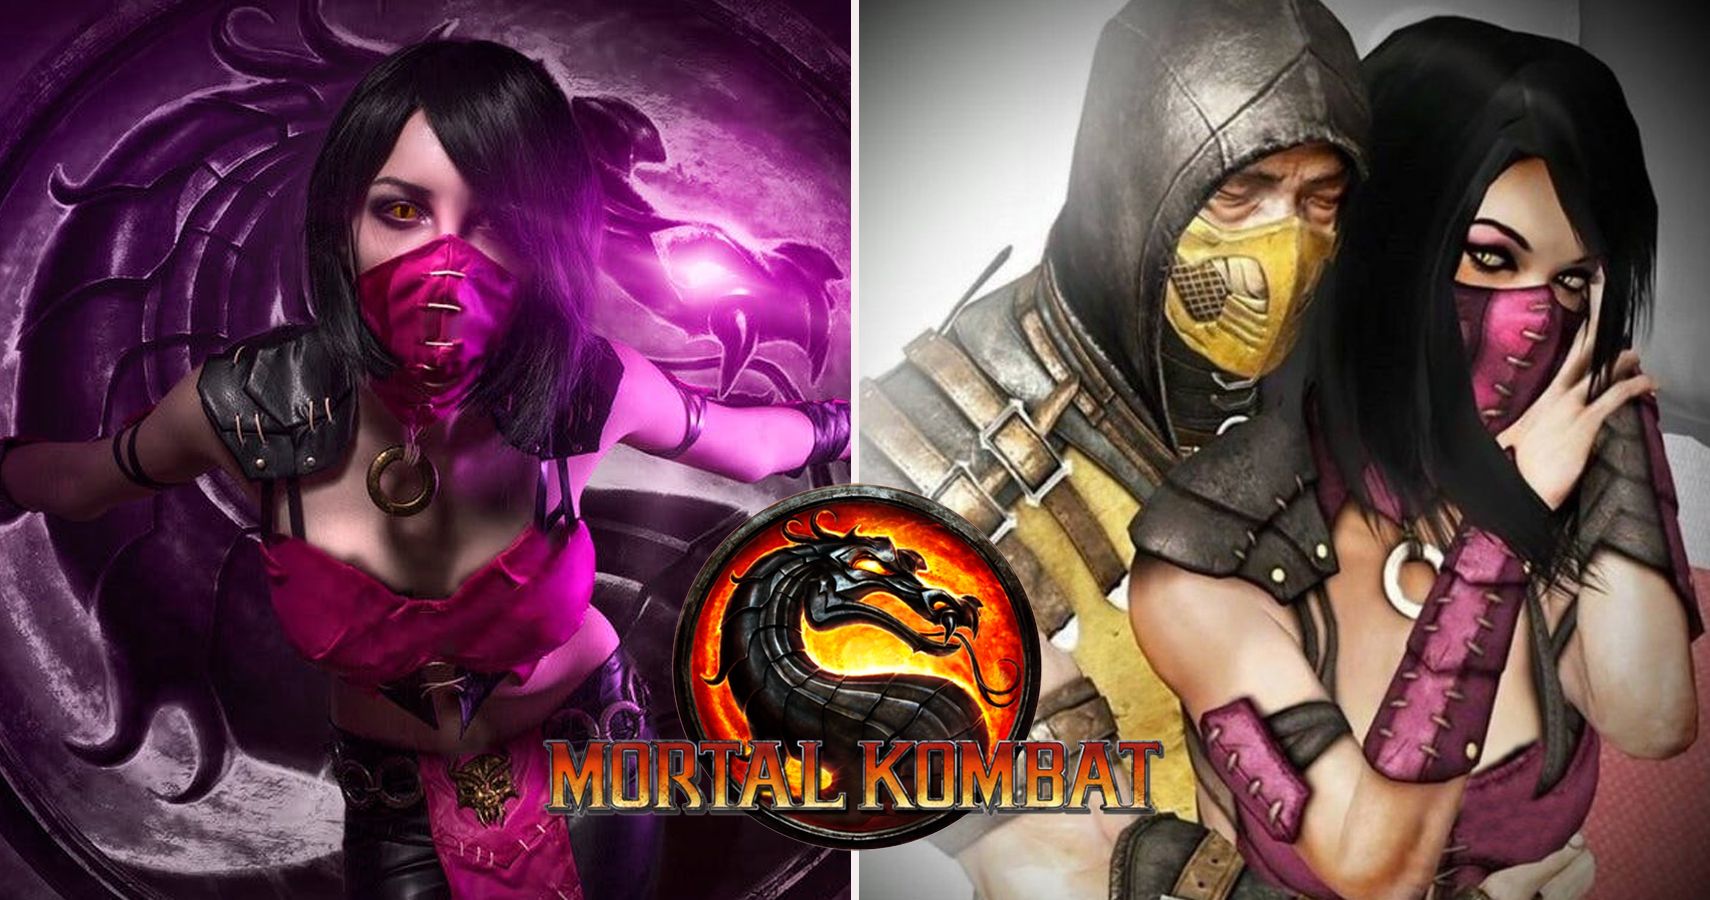 DOUBLE FLAWLESS VICTORY WITH THE PRINCESS! - Mortal Kombat X